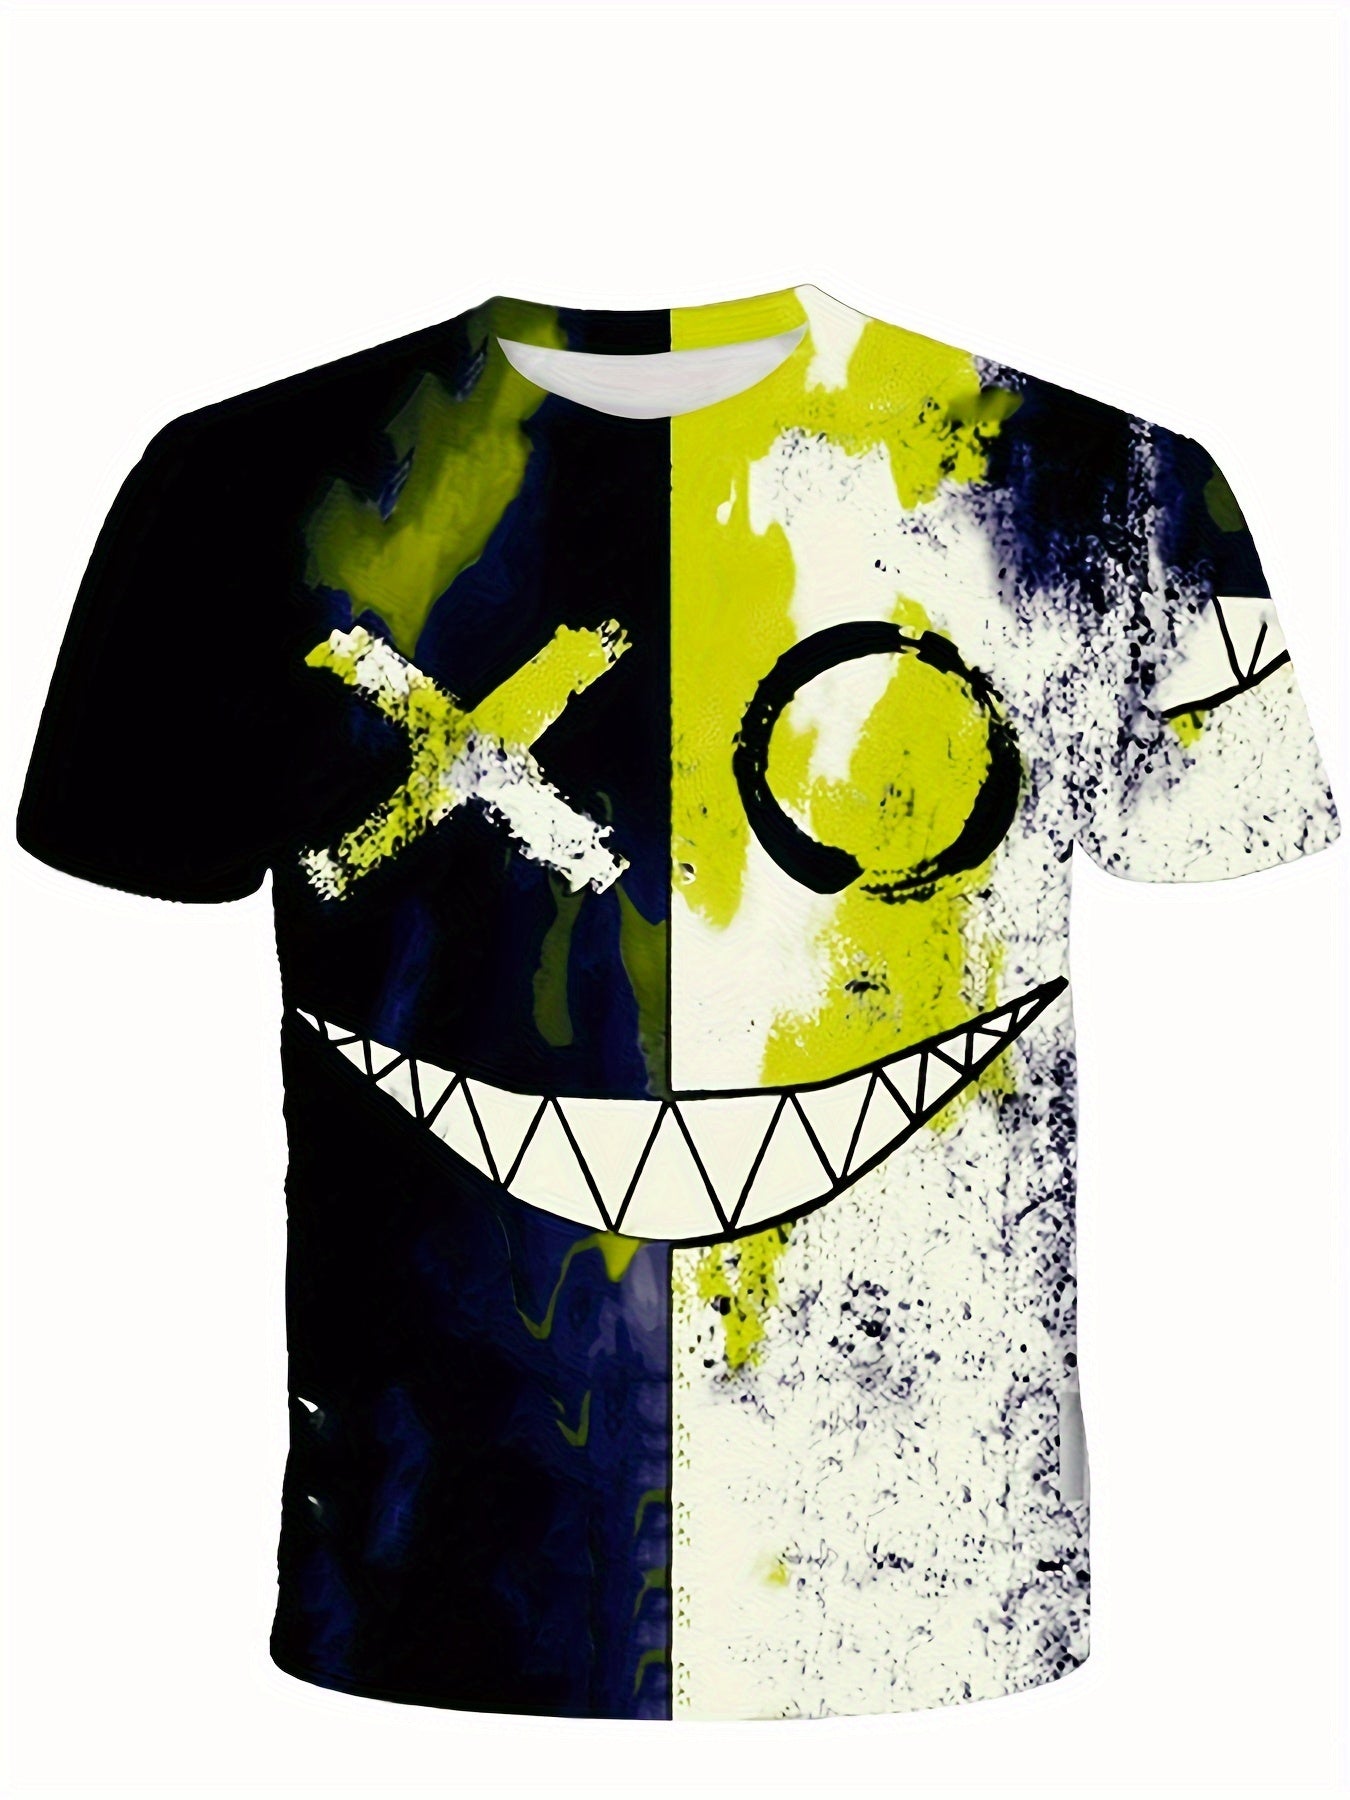 Colorful Graffiti Face T-Shirt For Boys - 3D Digital Print, Active & Stretchy Short Sleeve Tee For Summer Outdoor Fun